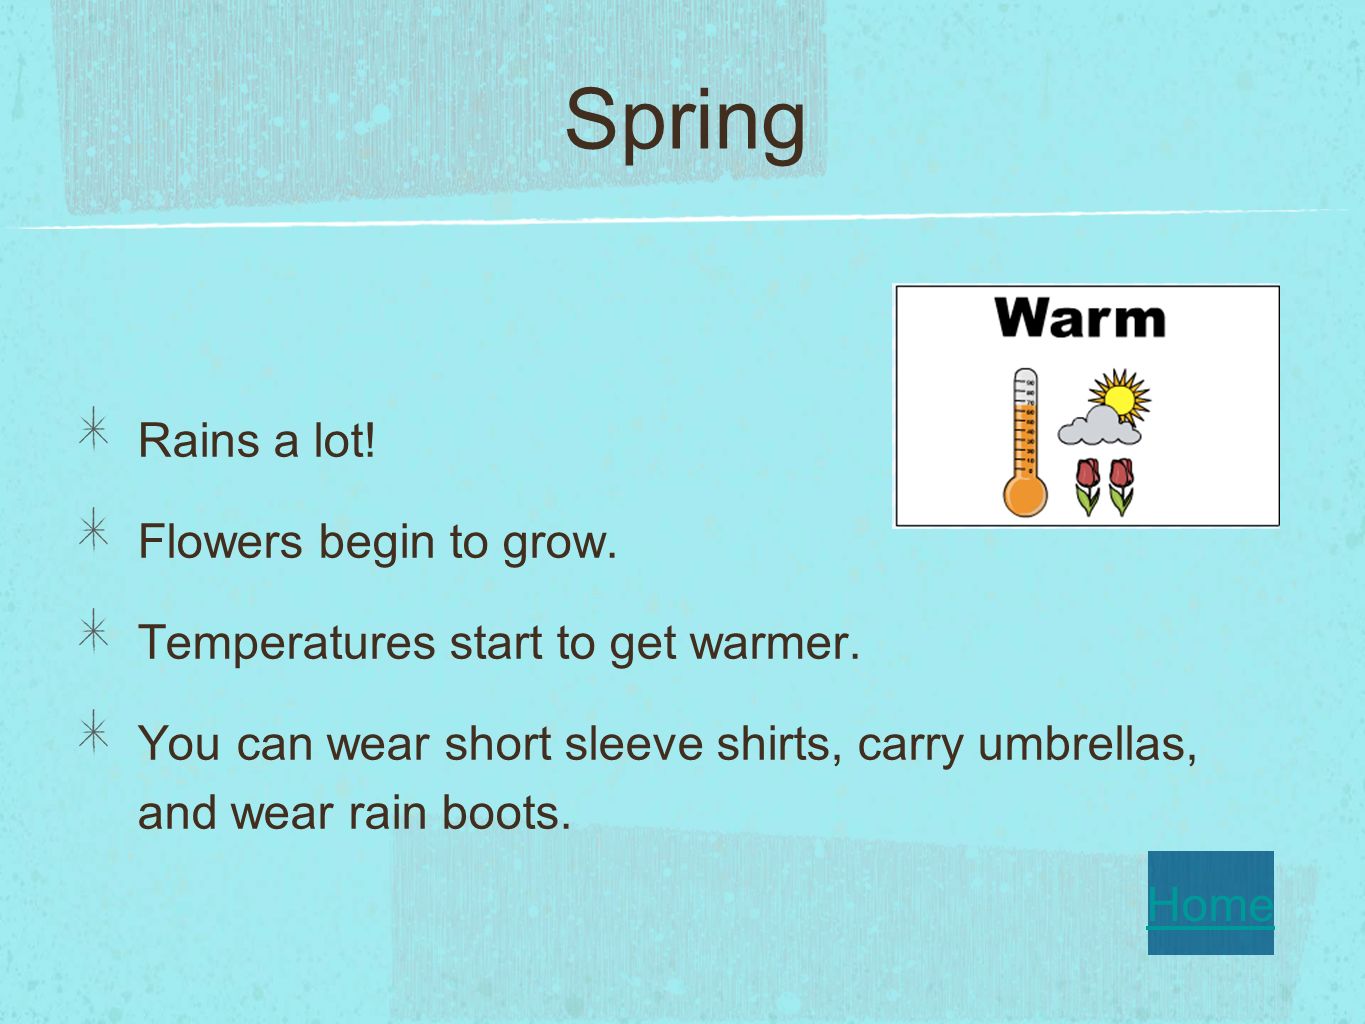 Spring Rains a lot. Flowers begin to grow. Temperatures start to get warmer.